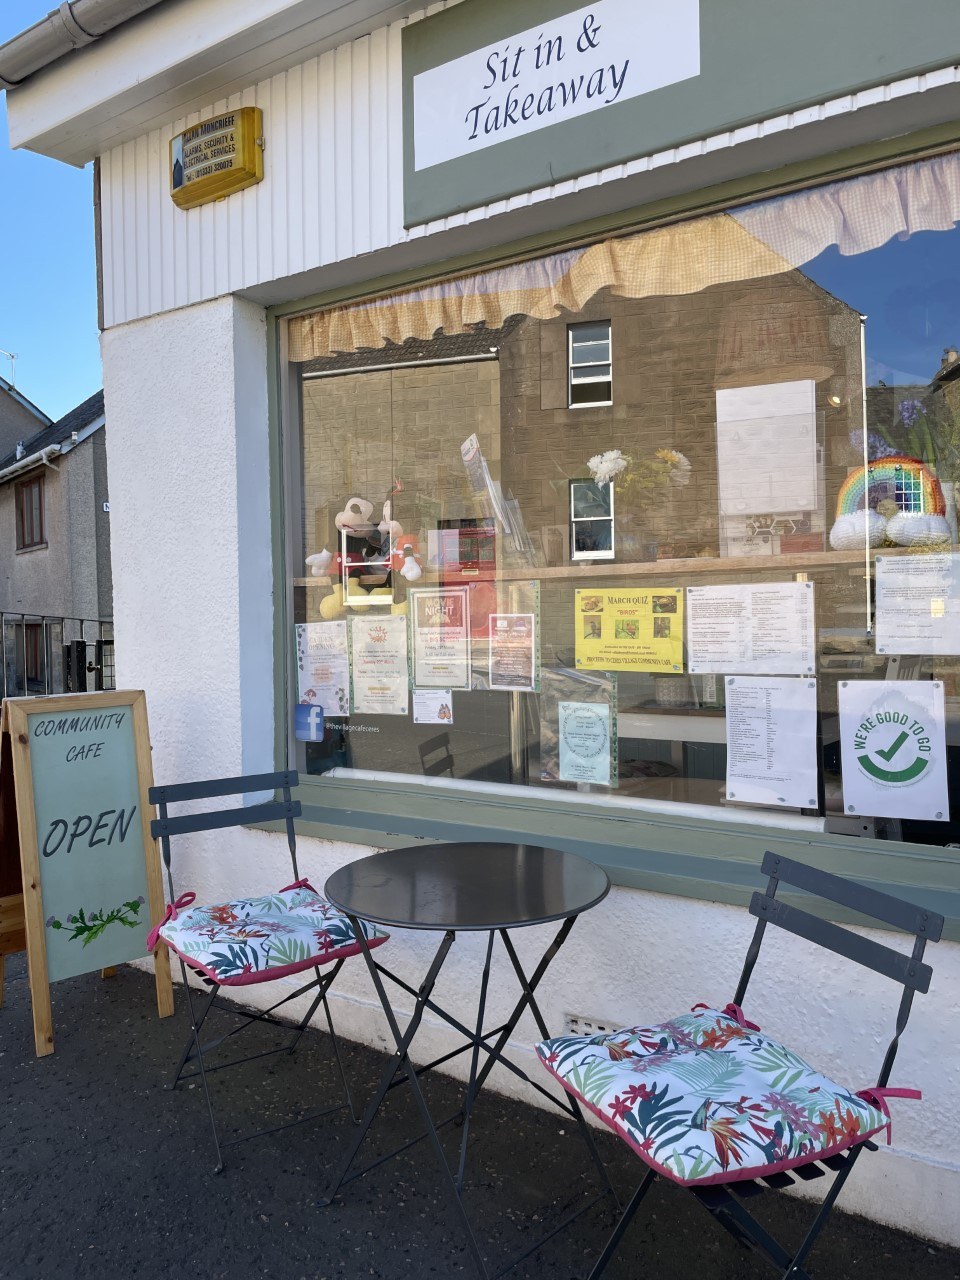 Ceres Community Cafe in Fife